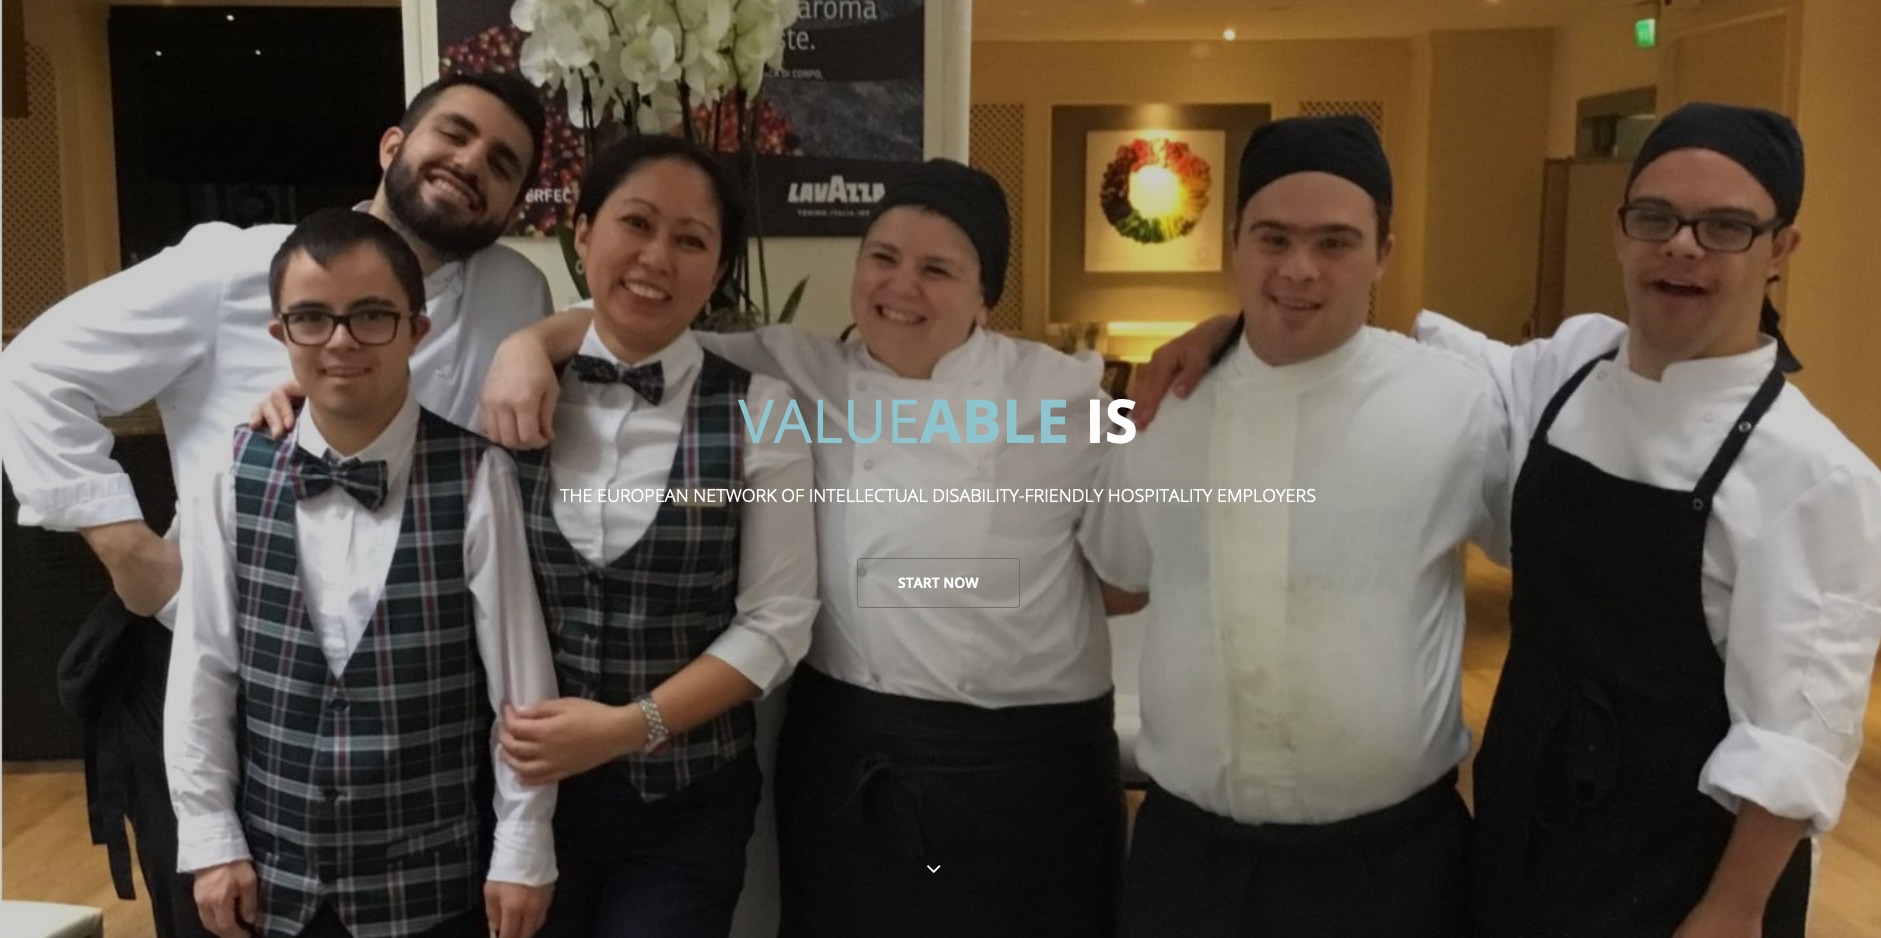 Screenshot of valueable.eu website showing hospitality and catering staff in uniform 